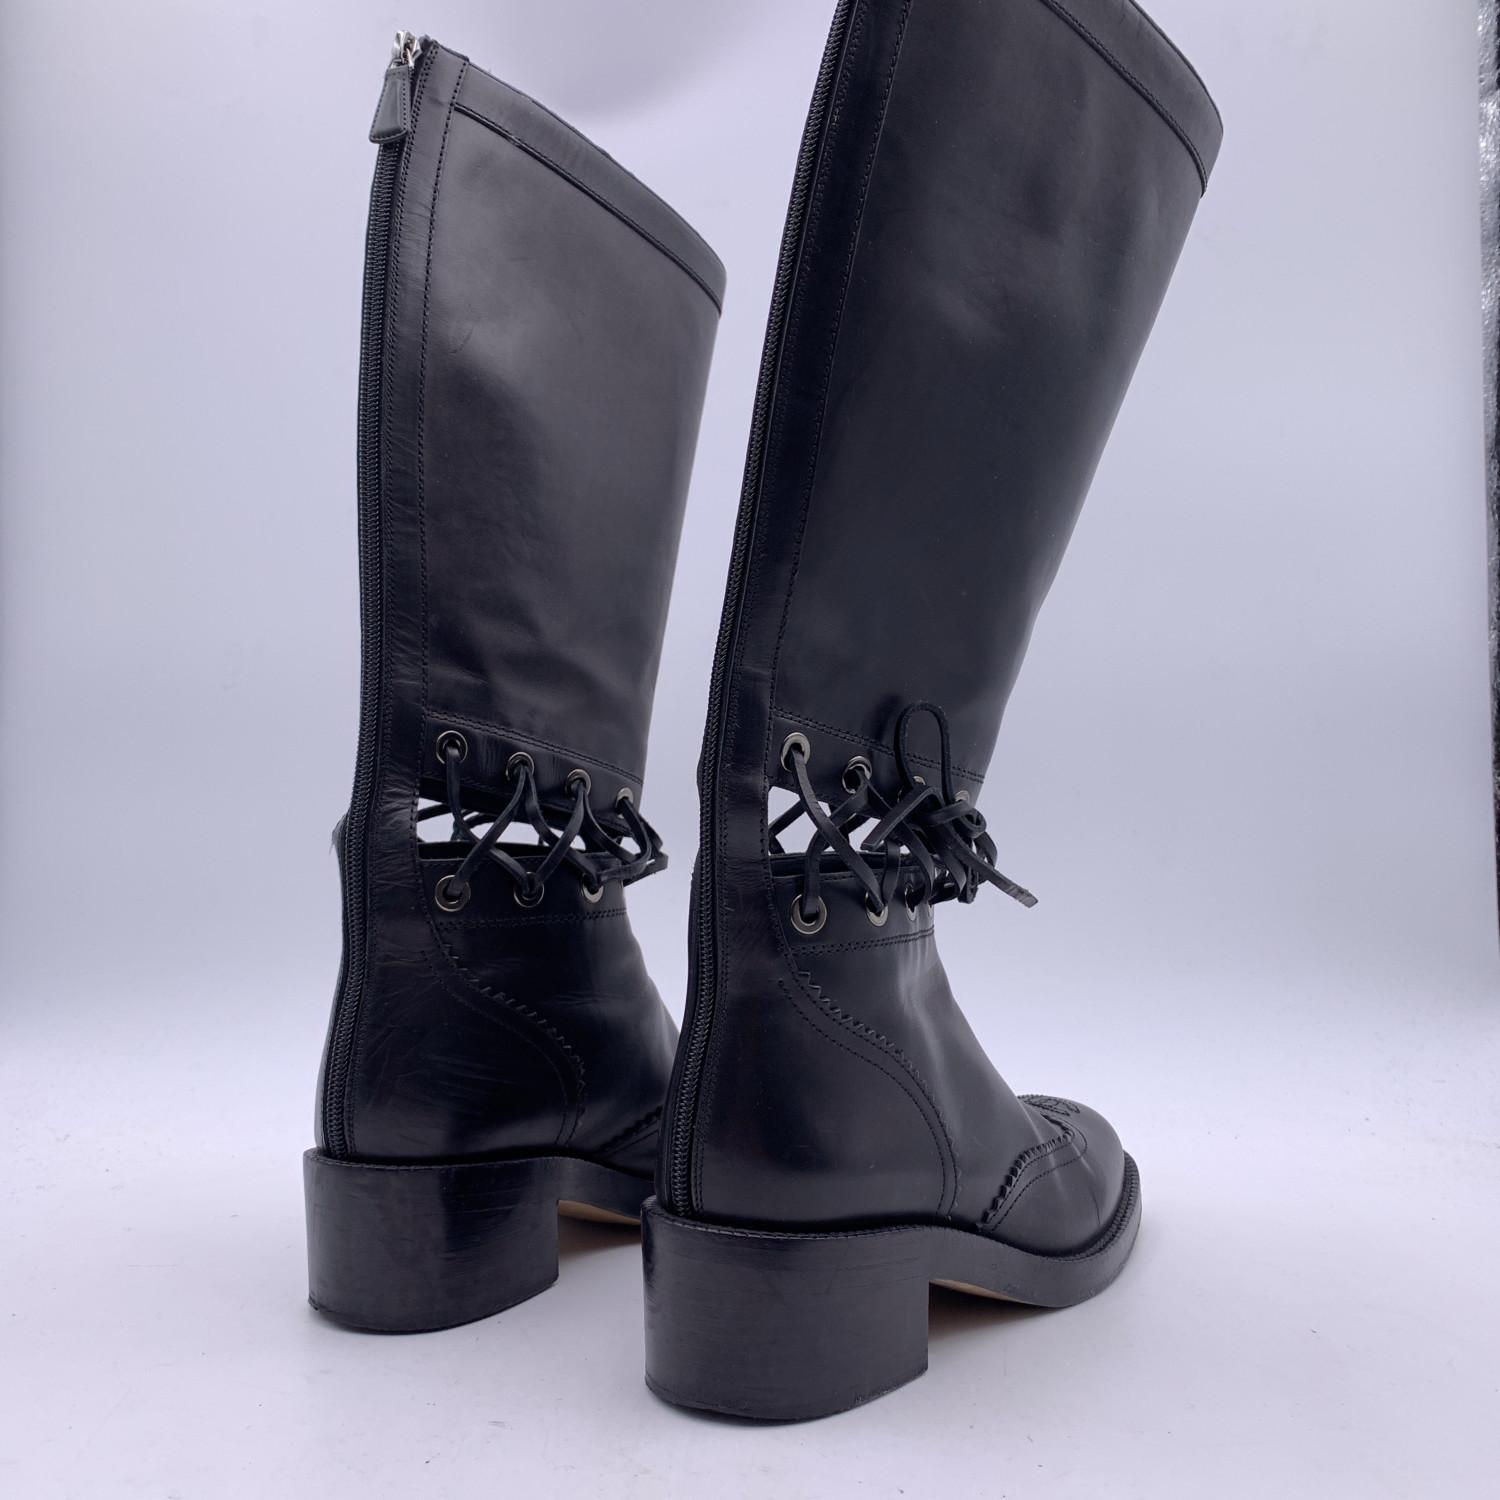 Chanel Black Leather 2016 Lace-Up Cutout CC Knee High Boots Size 38 For Sale 5